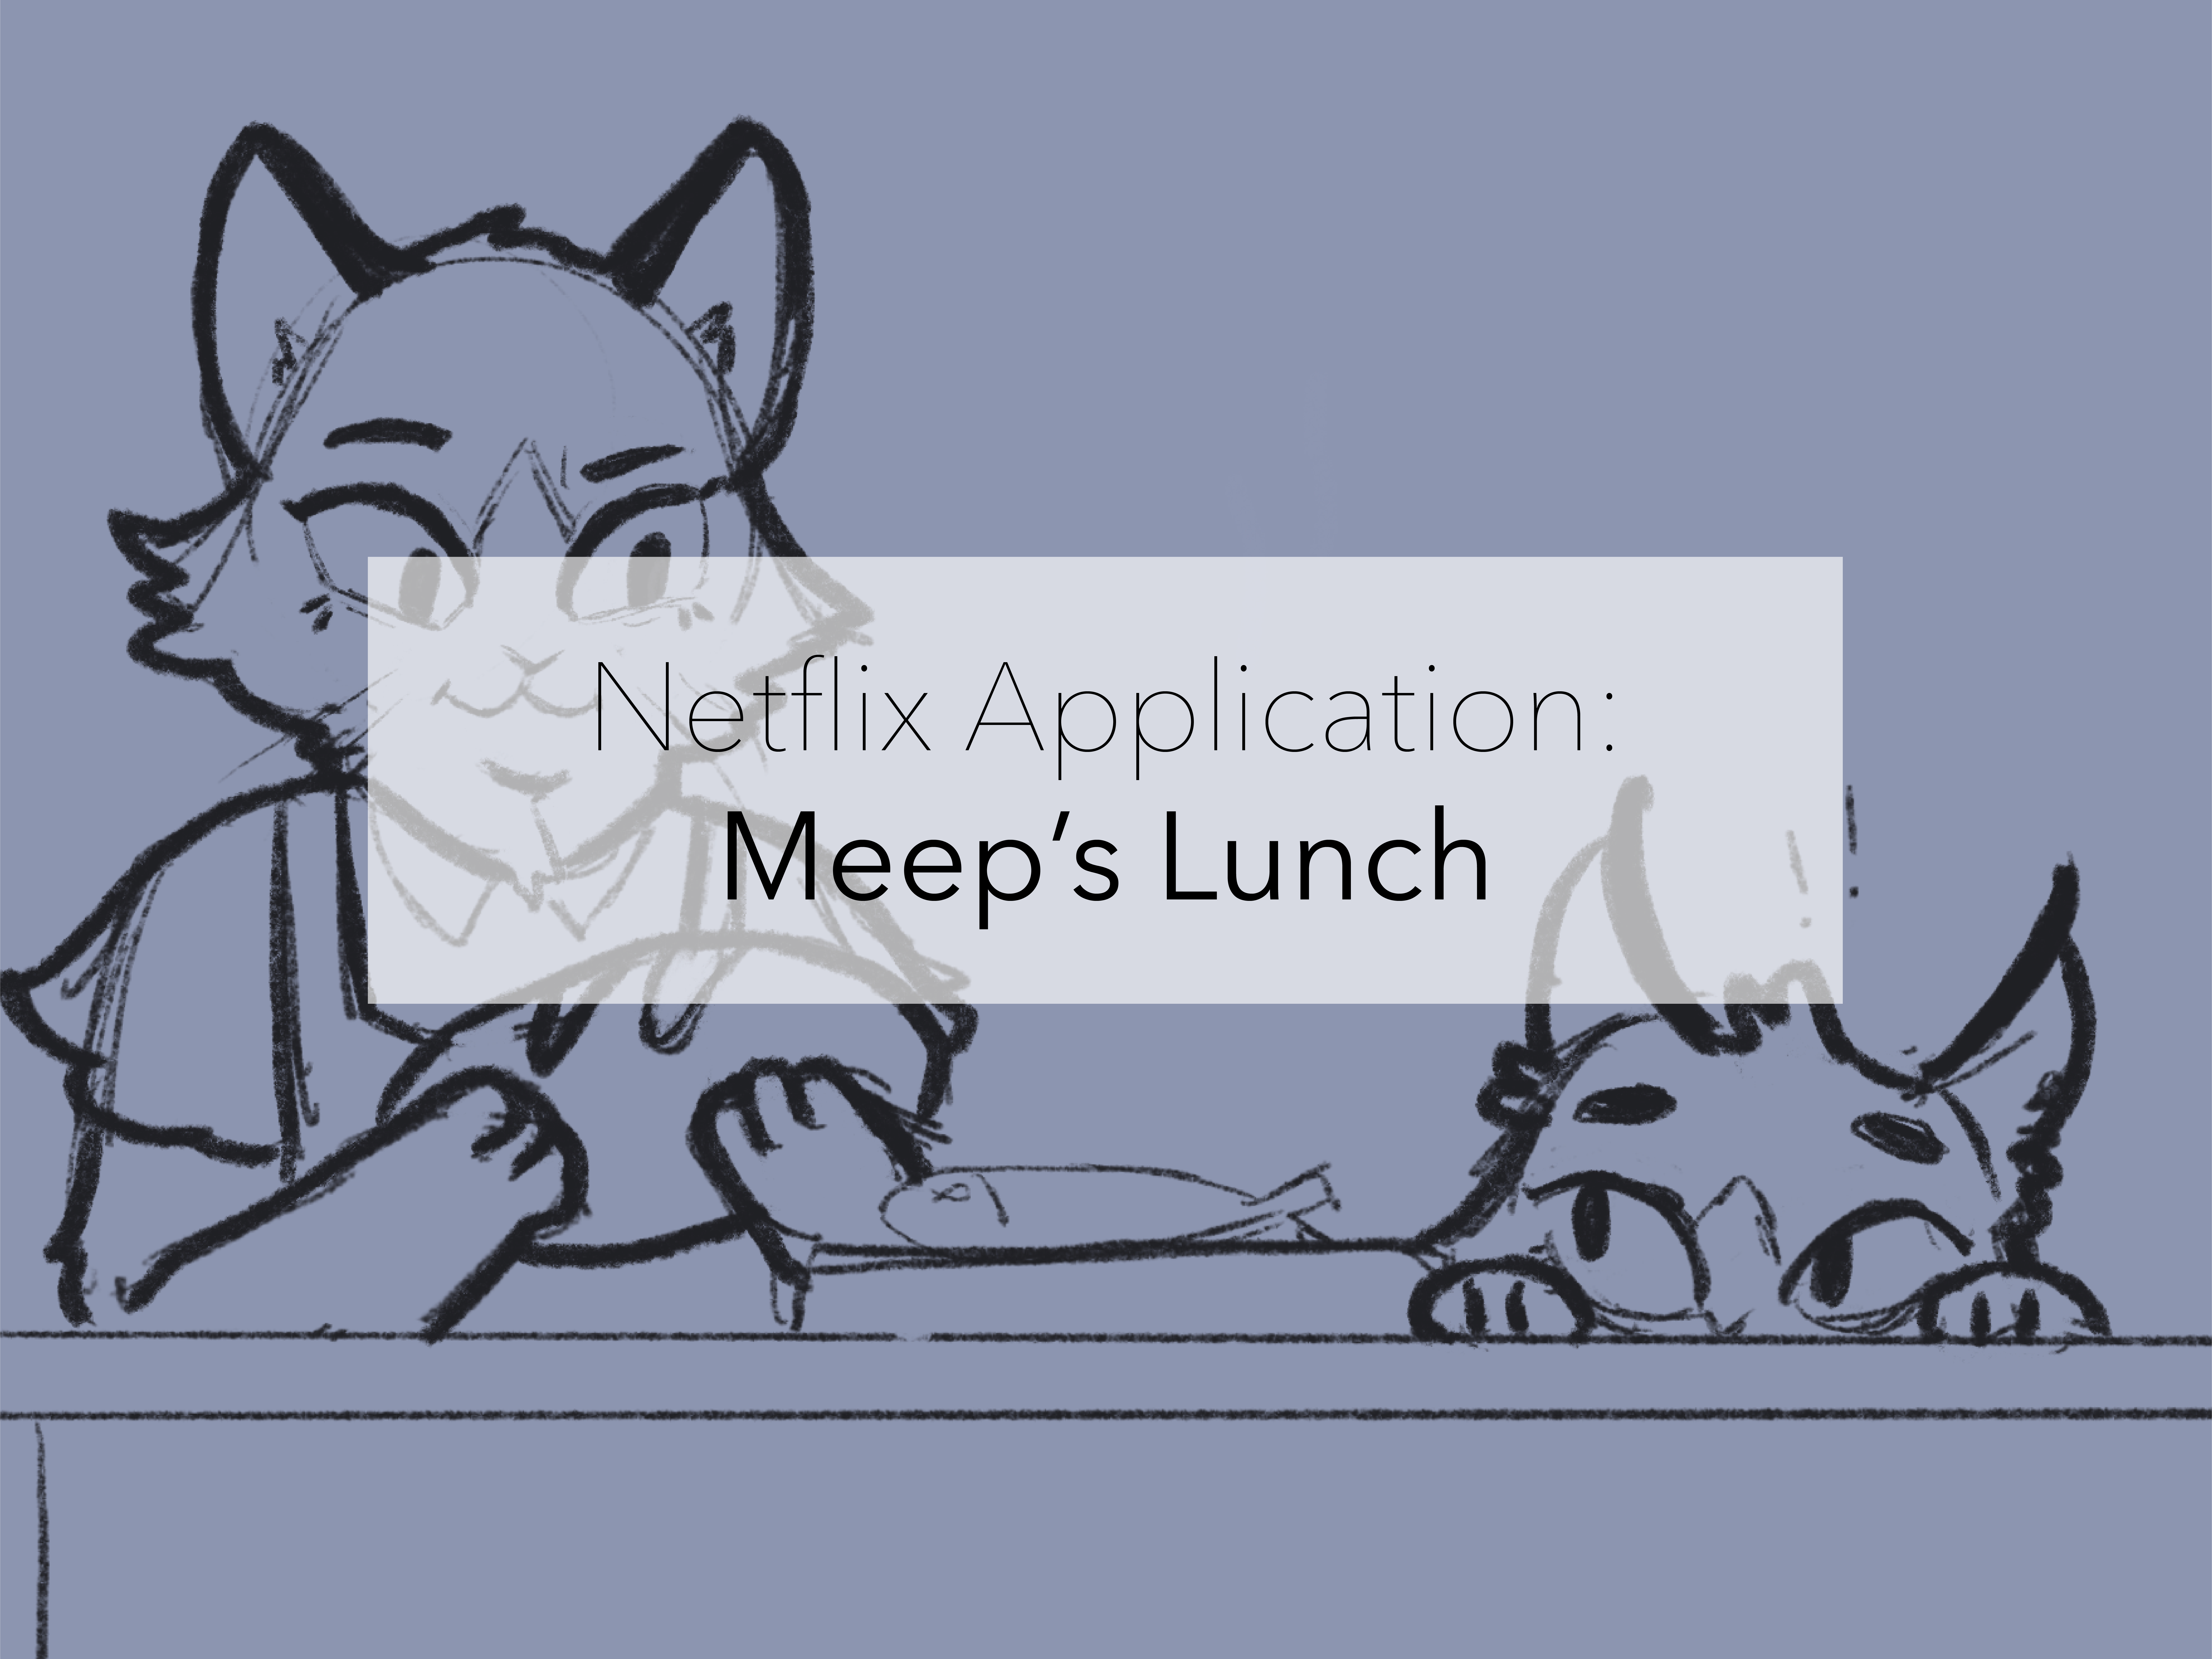 Meep's Lunch